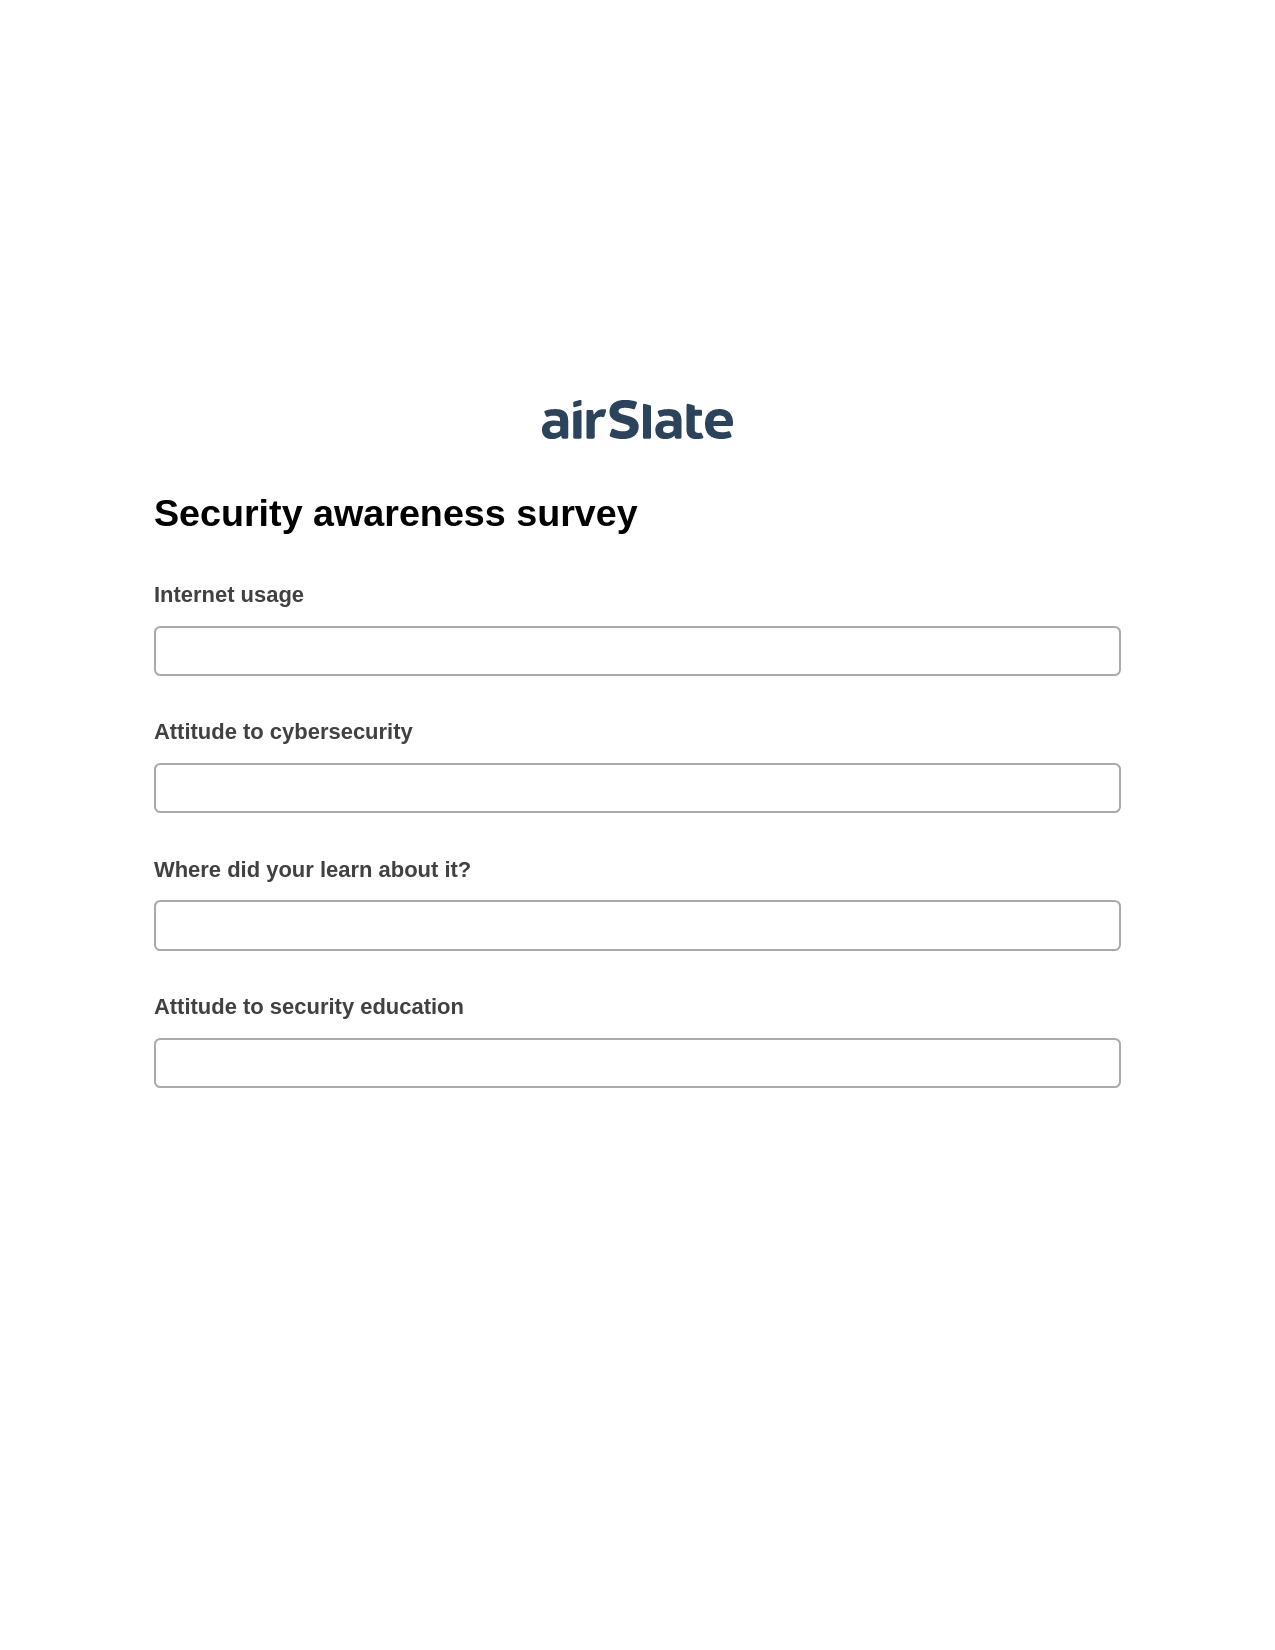 Security awareness survey Pre-fill from Google Sheet Dropdown Options Bot, Create slate in another Flow Bot DEPRECATED, Export to Google Sheet Bot